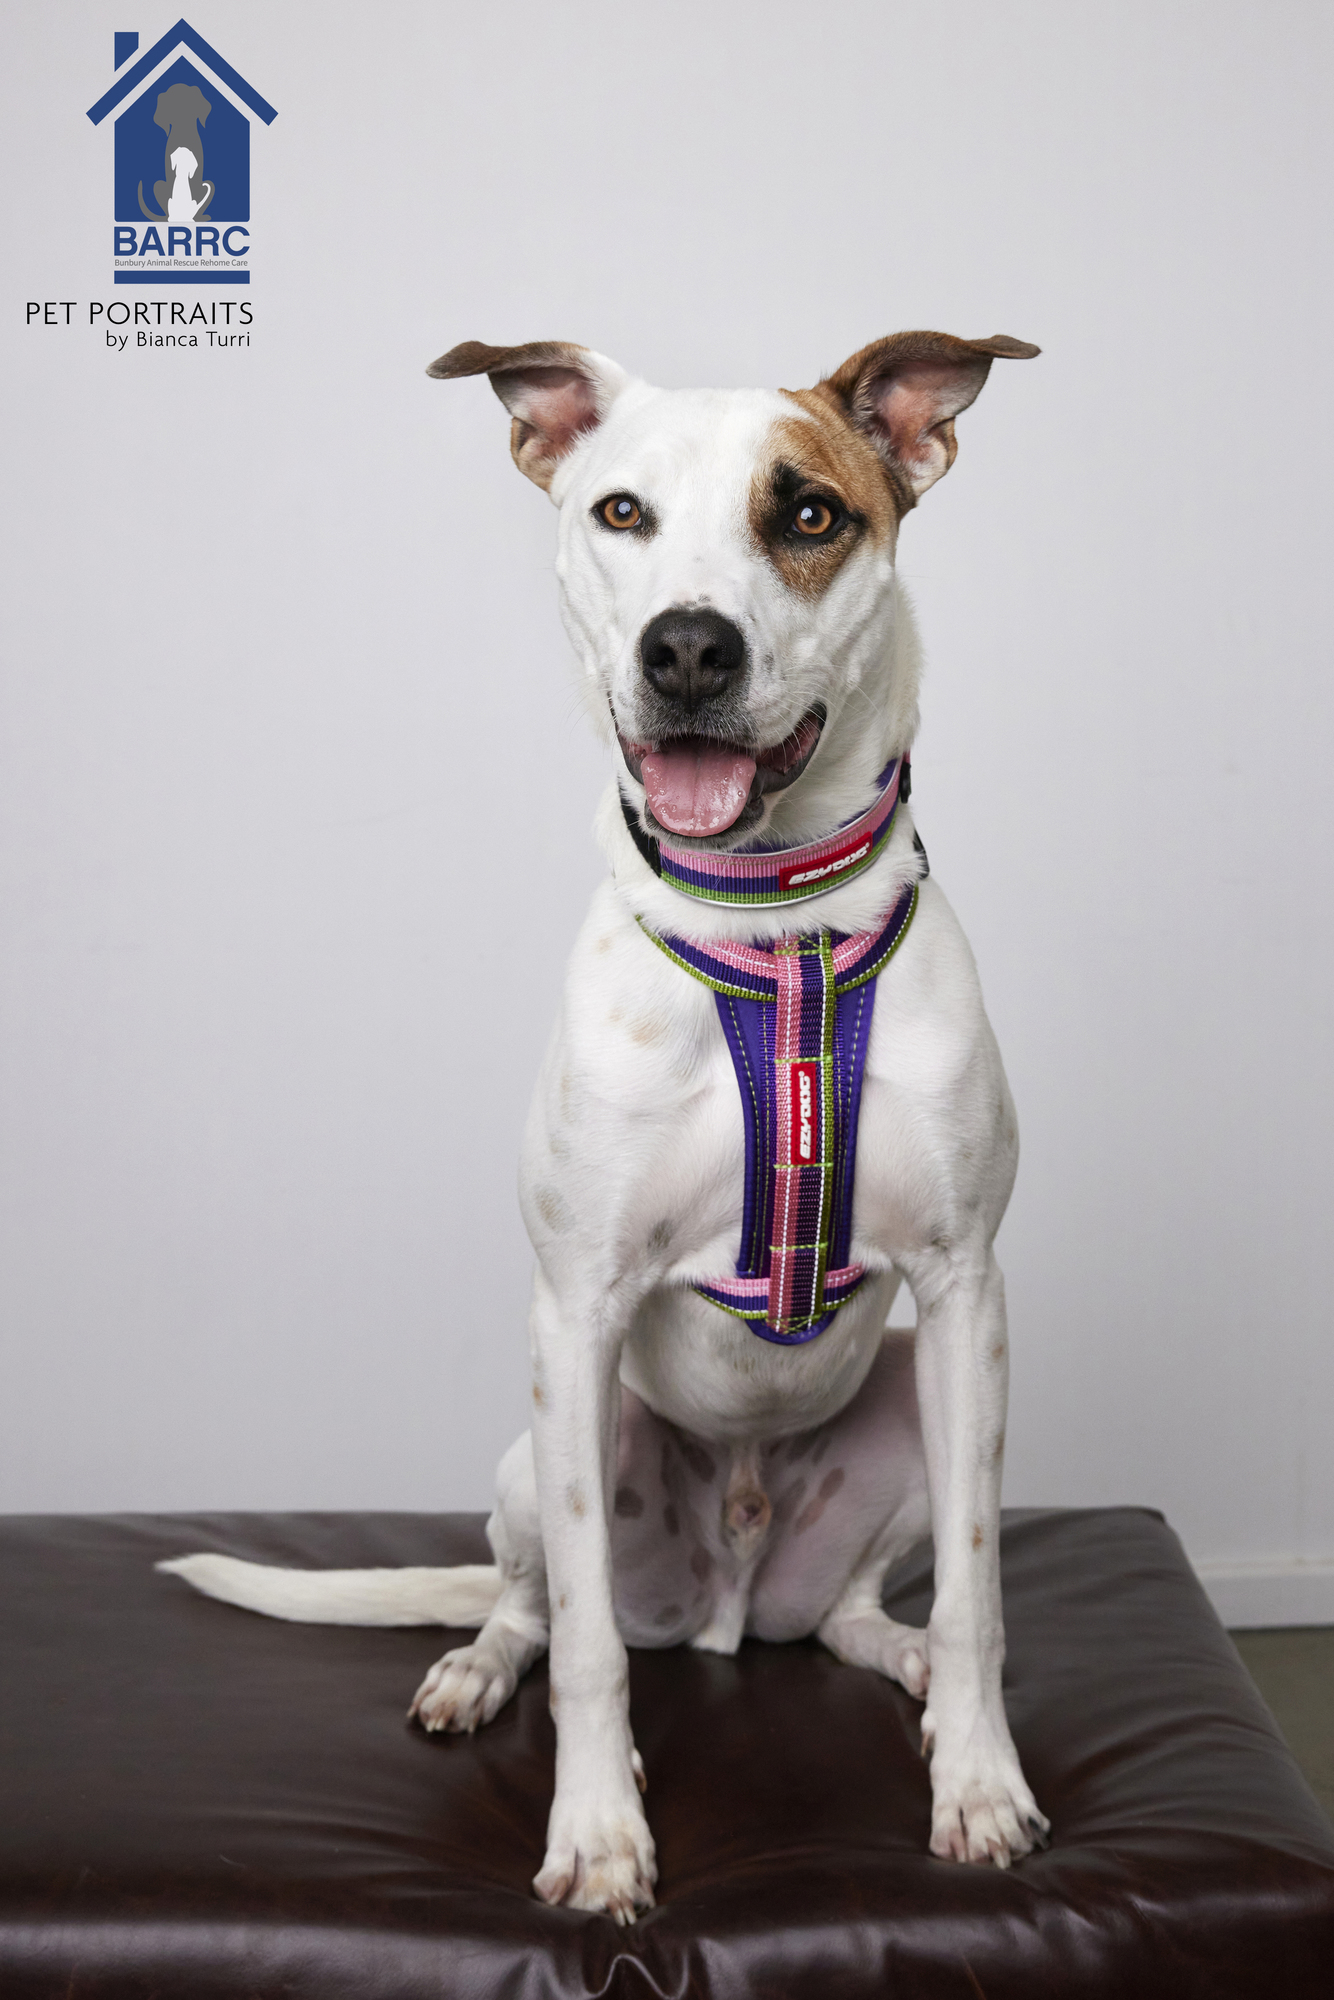 White dog with brown patches wearing a colourful ezydog collar and harness